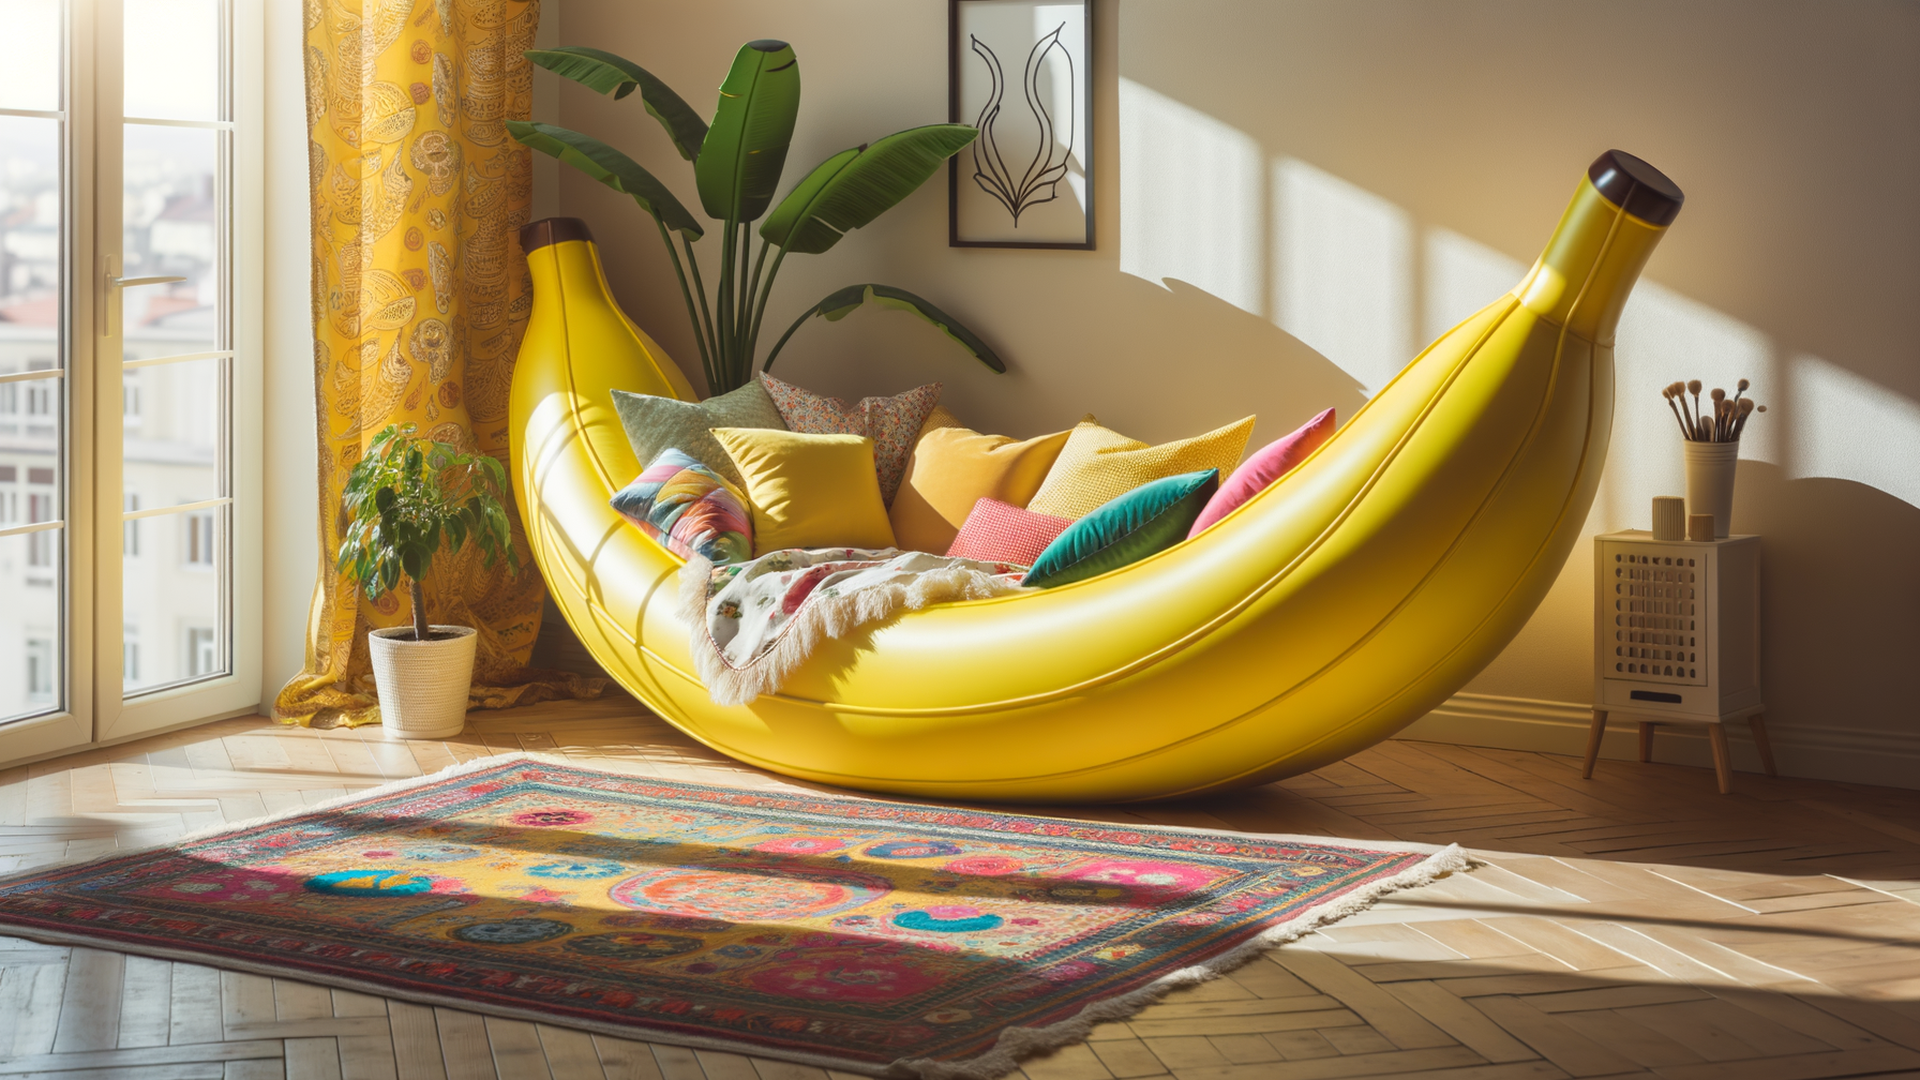 A AI-generated image of a banana-shaped couch in a living room created using Dall-E 3. 